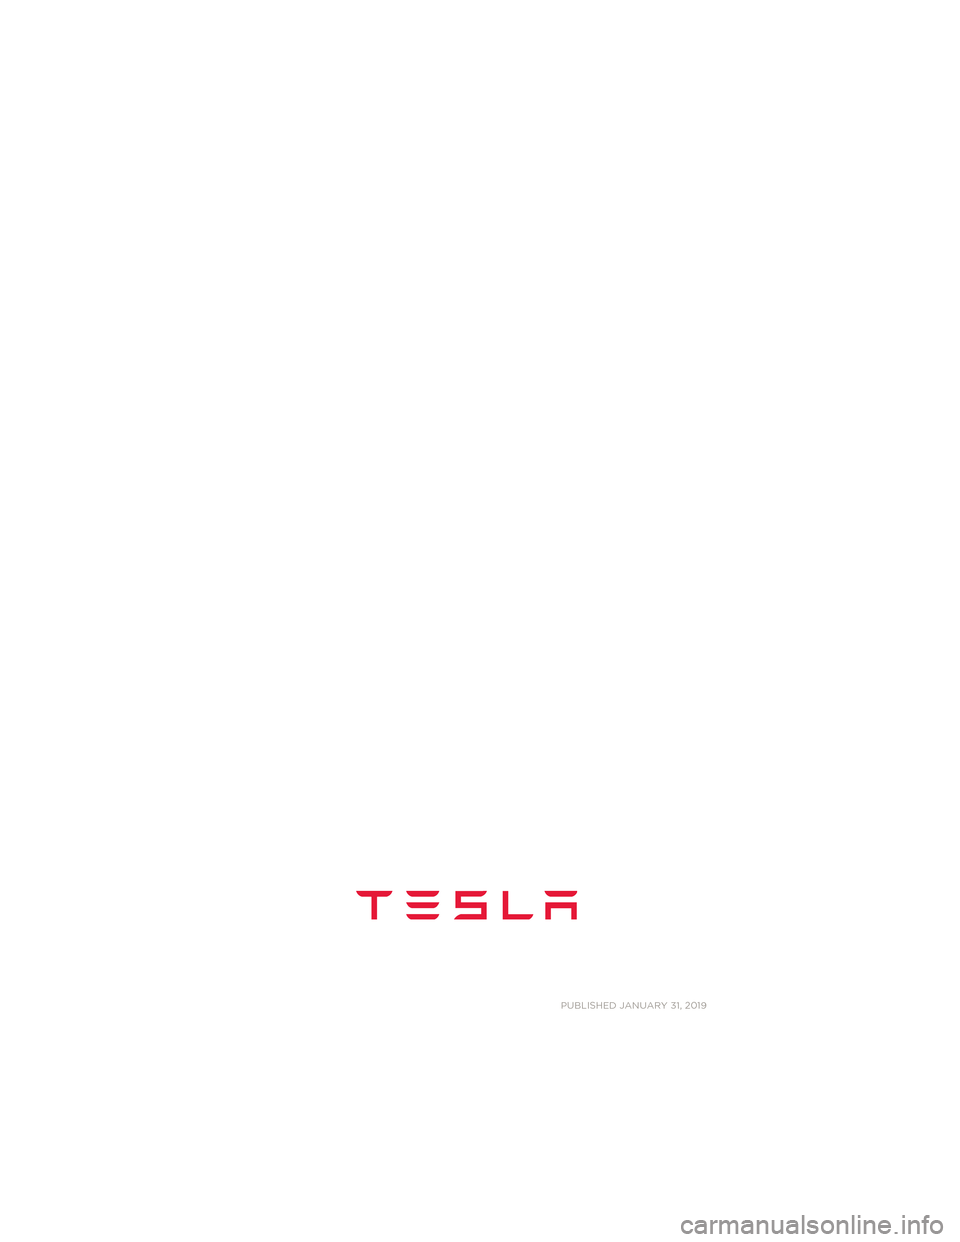 TESLA MODEL 3 2019  Owners Manual (Europe) PUBLISHED JANUARY 31, 2019
Model S Quick Guide - NA Rev C.book  Page
 2  Wednesday, December 18, 2013  12:40 PM 